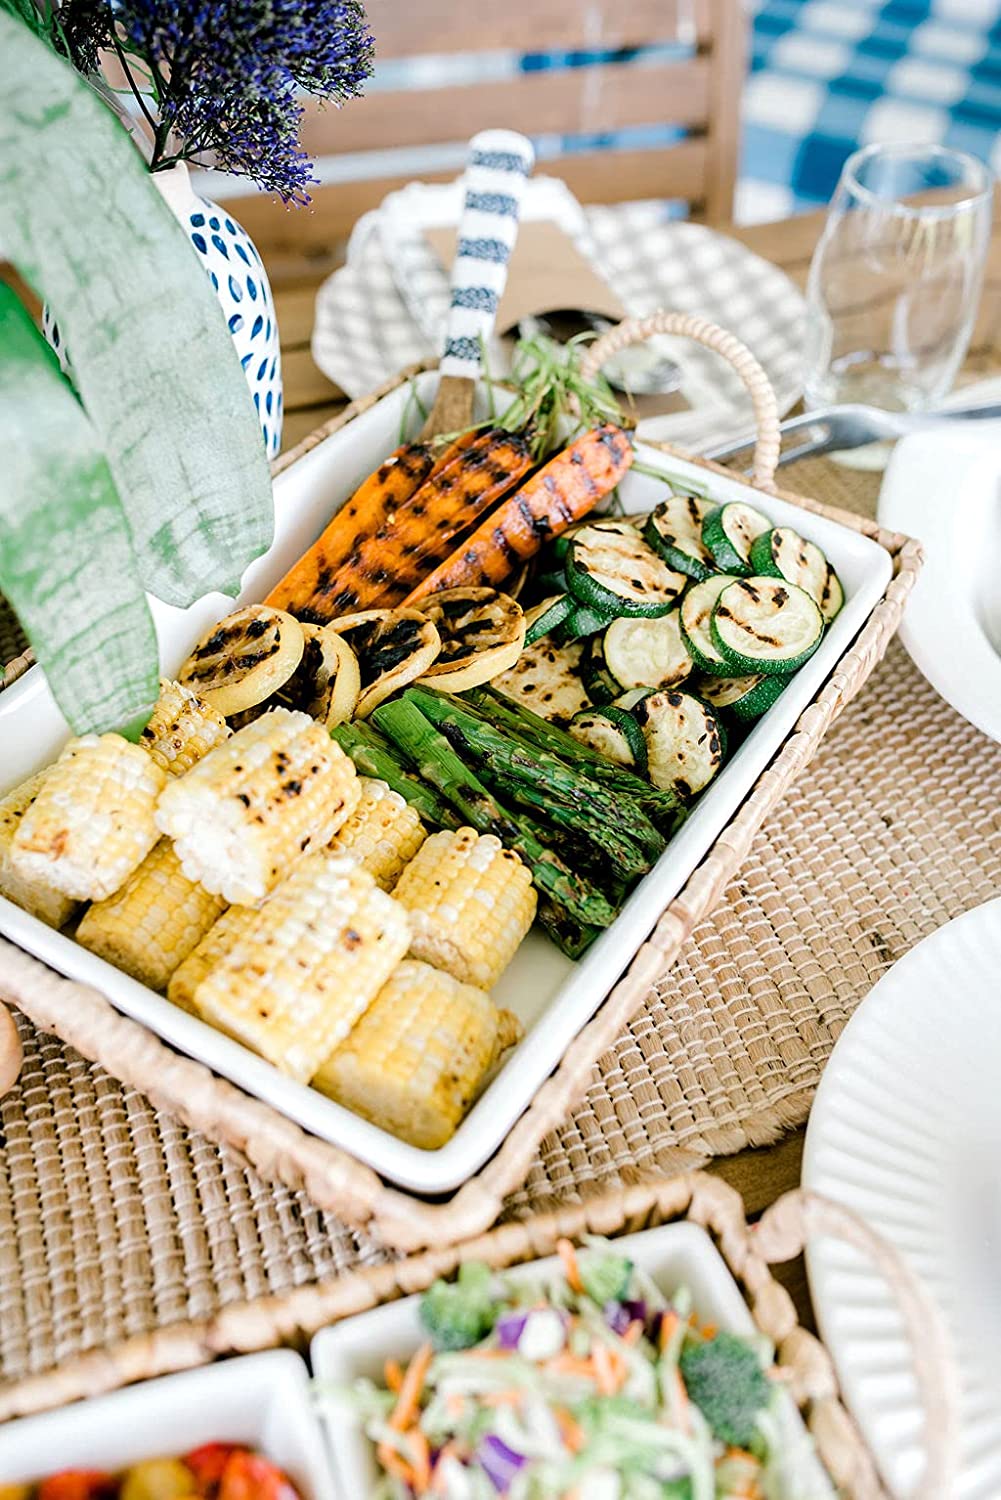 white ceramic baker in a basket filled with grilled veggies on an outdoor table.